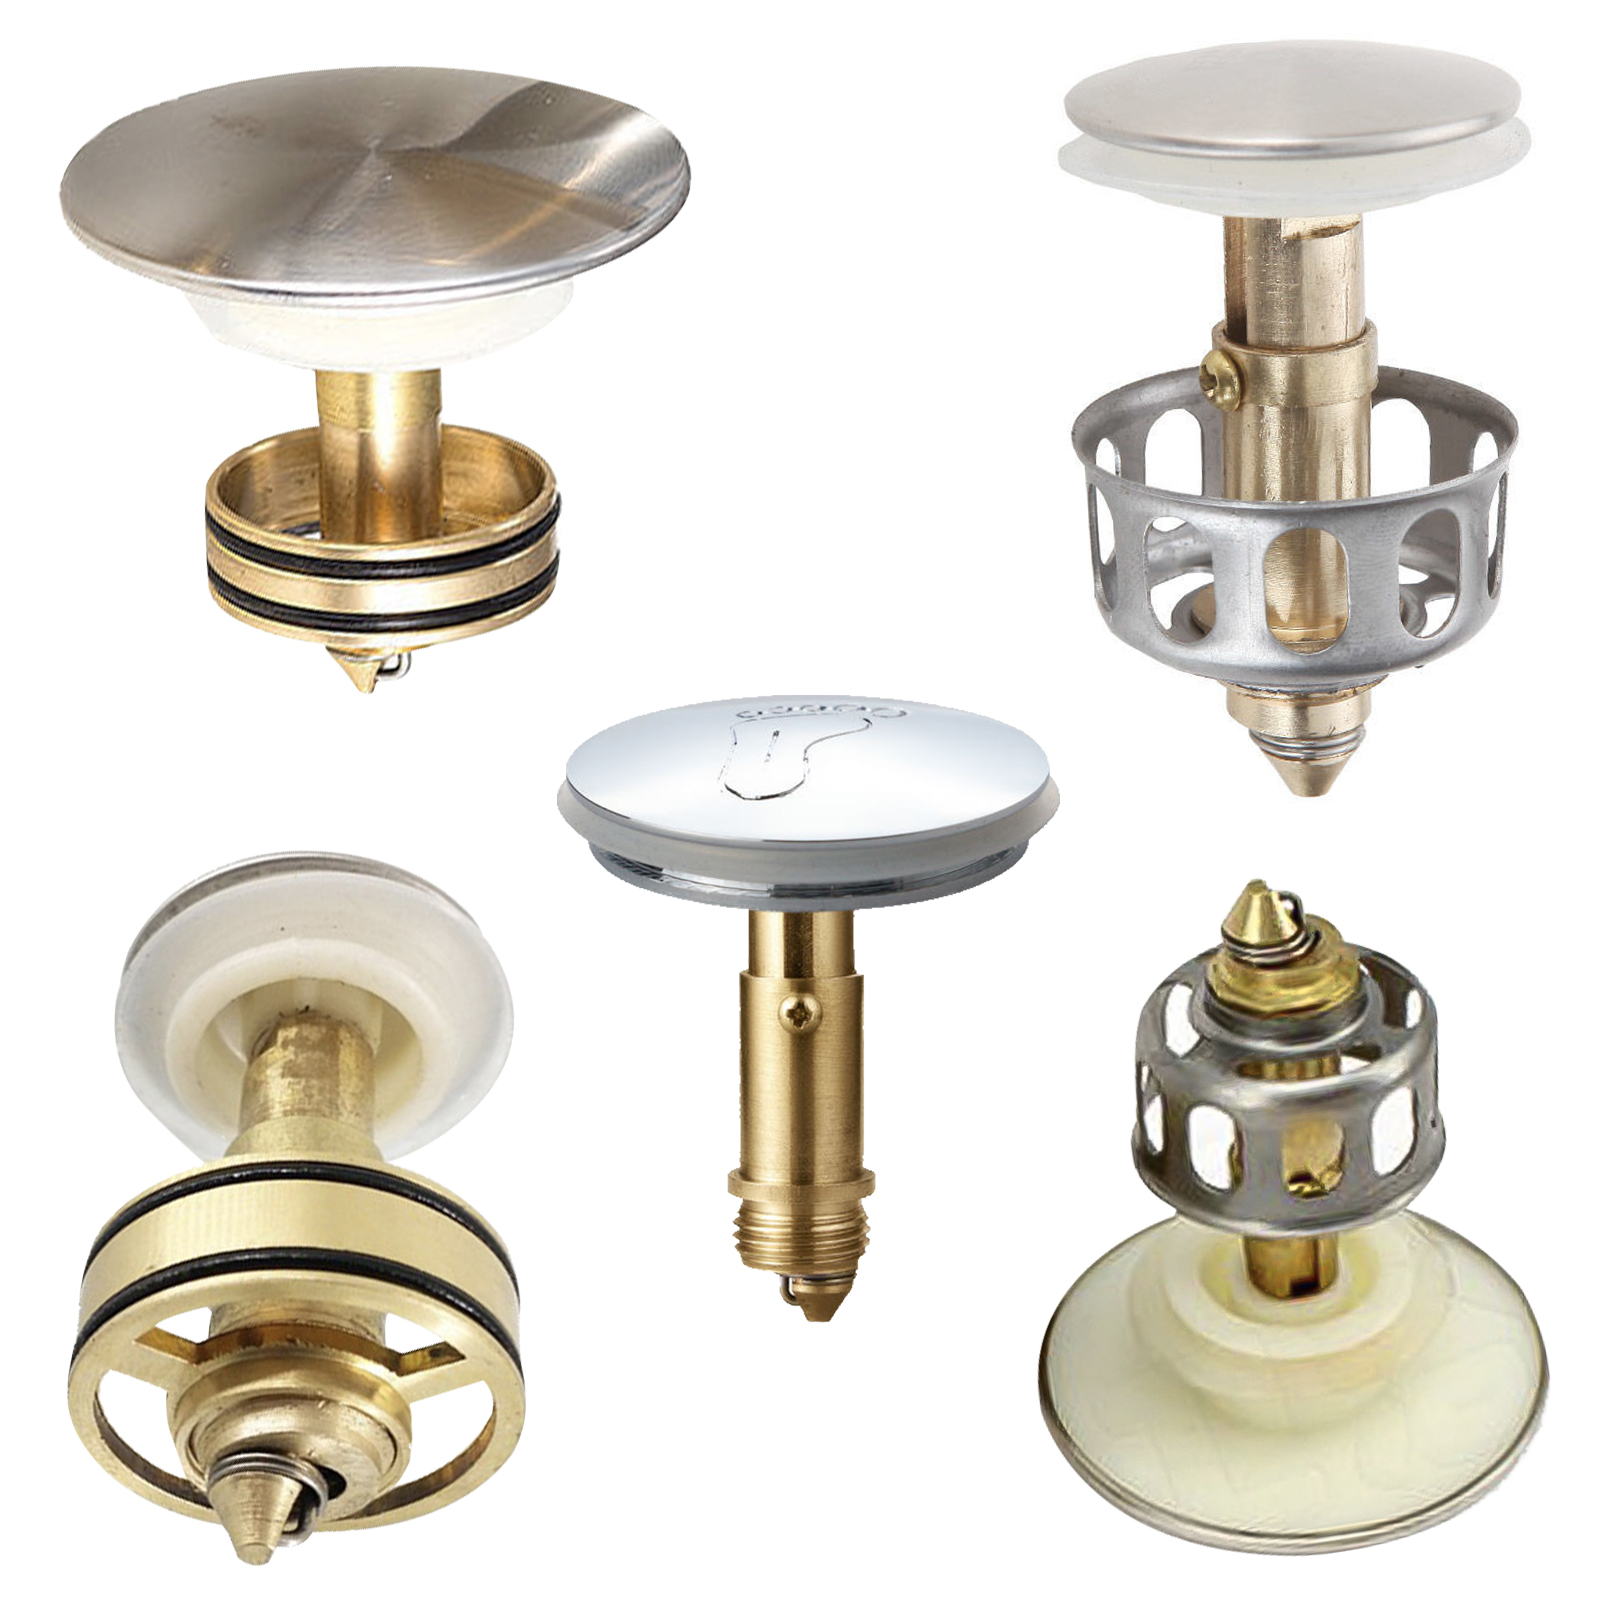 Copper Bouncing Core Filter Cover with Basket Shower Floor Drain Bathroom Plug Trap Hair Catcher Basin Faucet Accessories